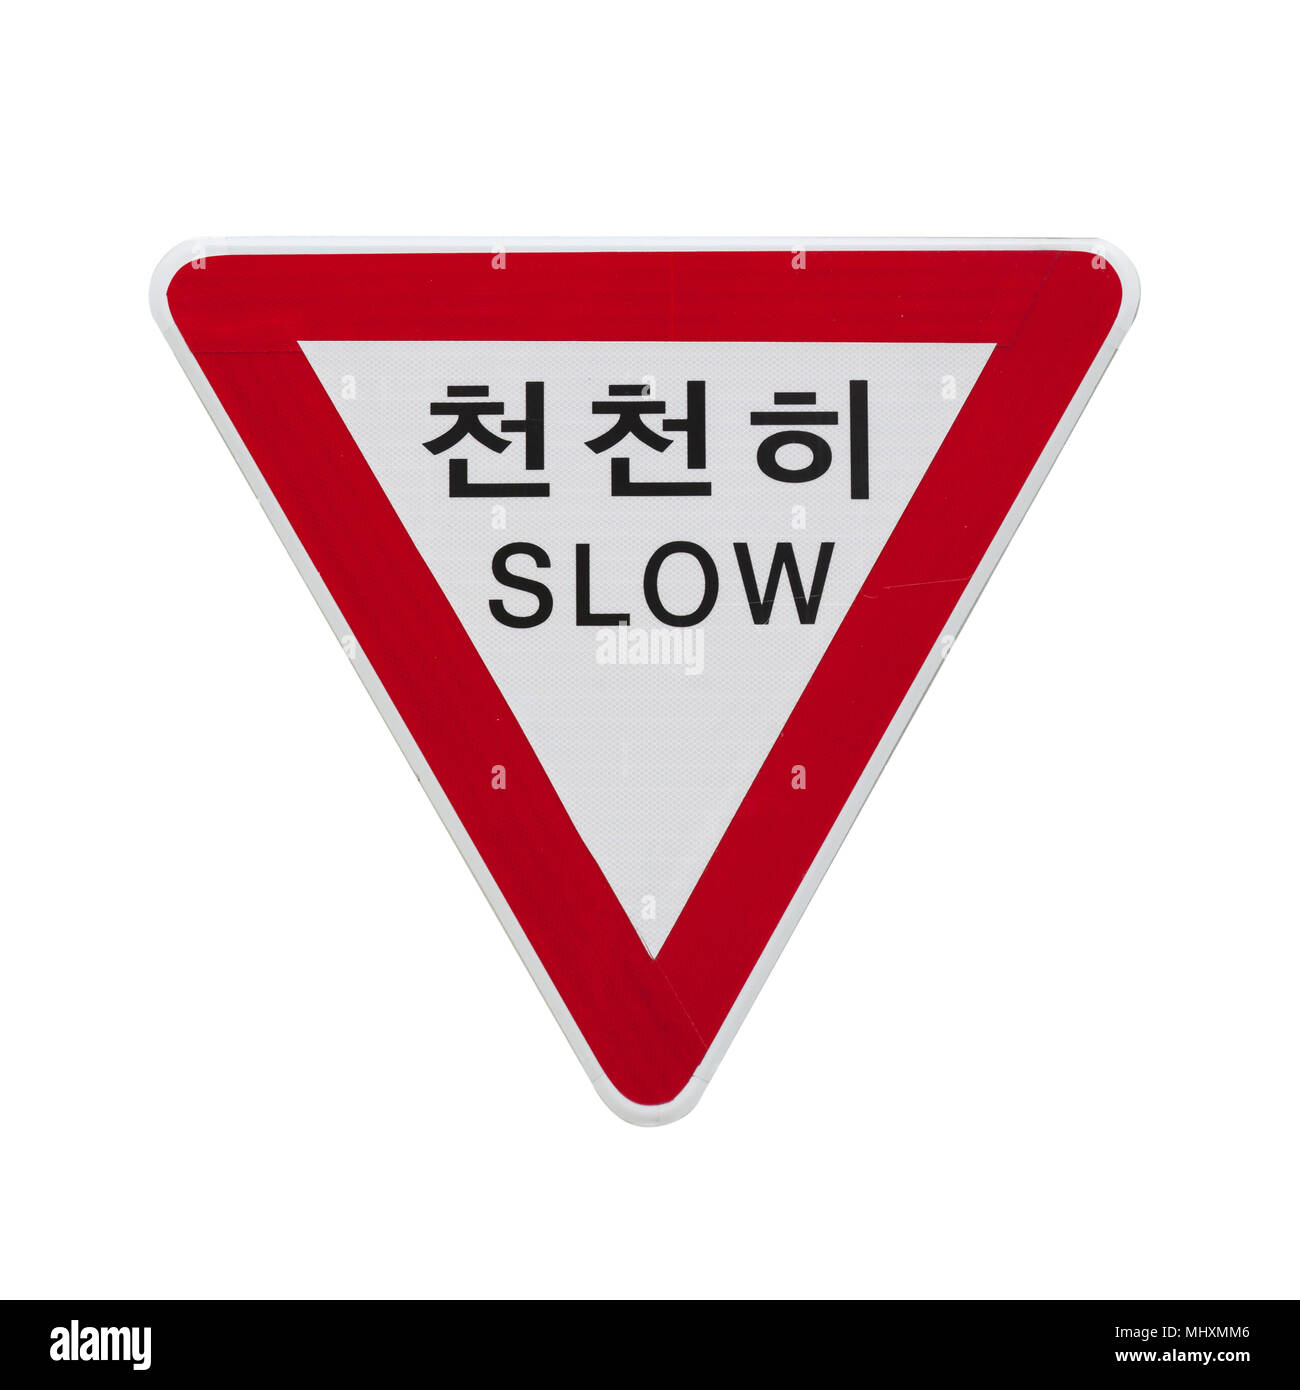 South Korean triangle yield or give way road sign isolated on white background Stock Photo